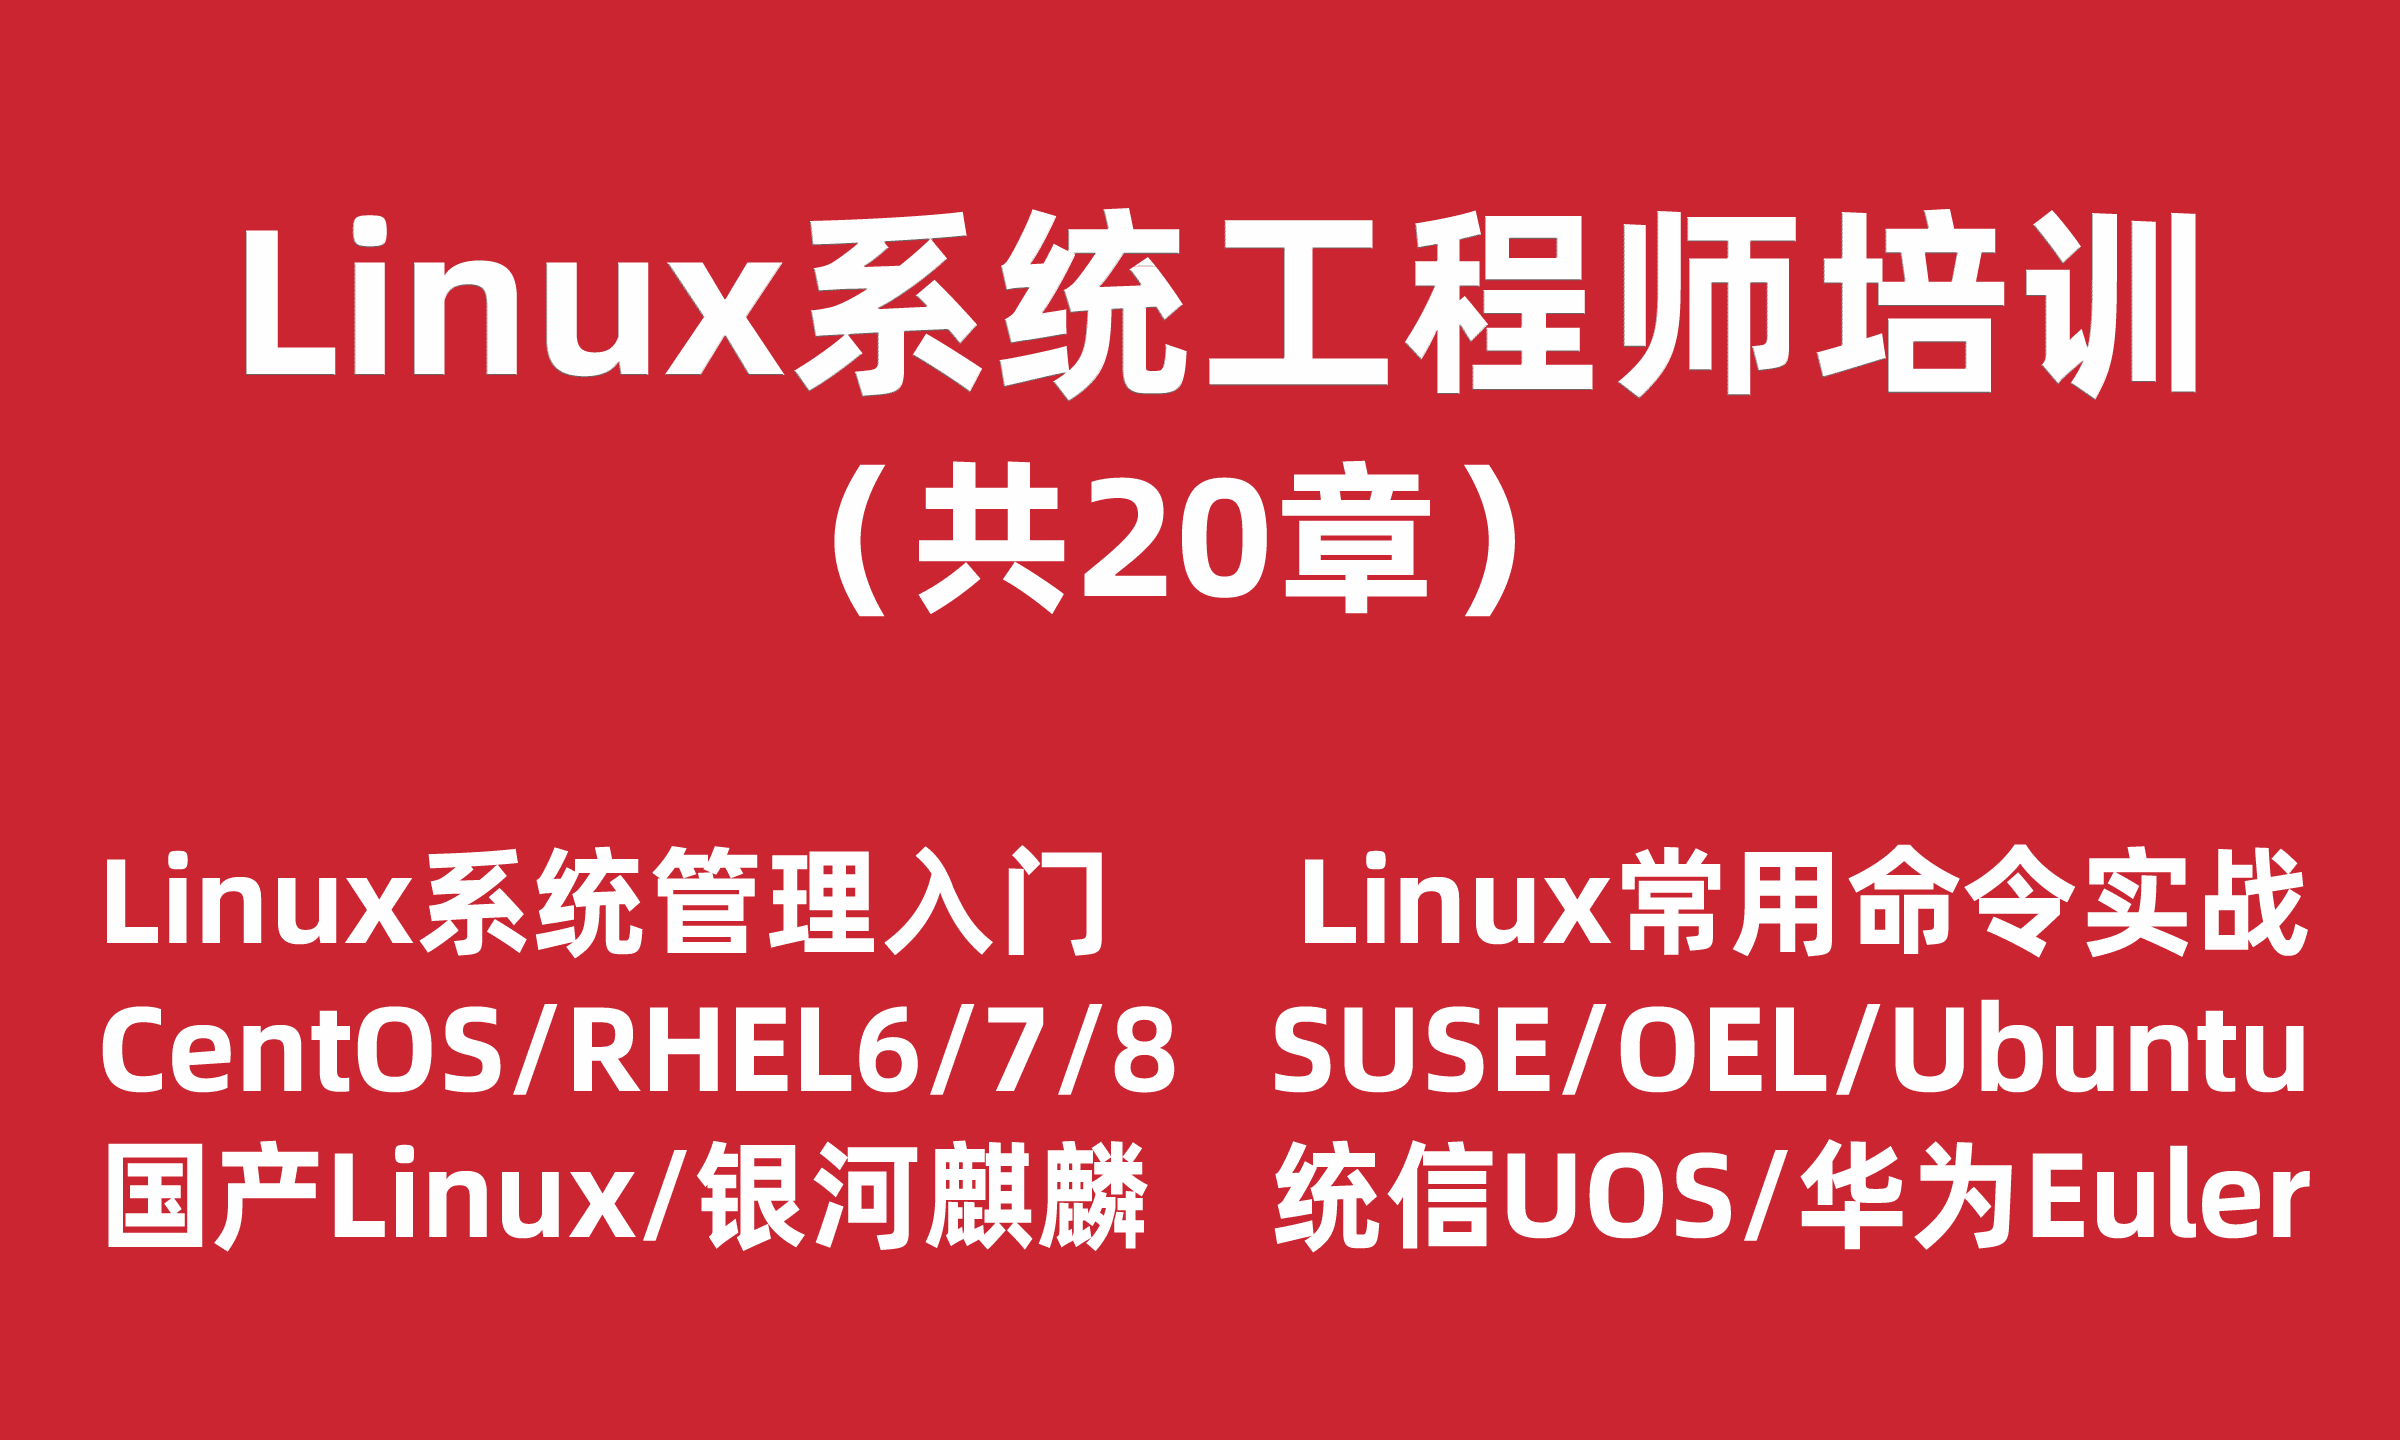  Practical training course for Linux system operation and maintenance engineers (Red Hat RHEL, CentOS, domestic series)